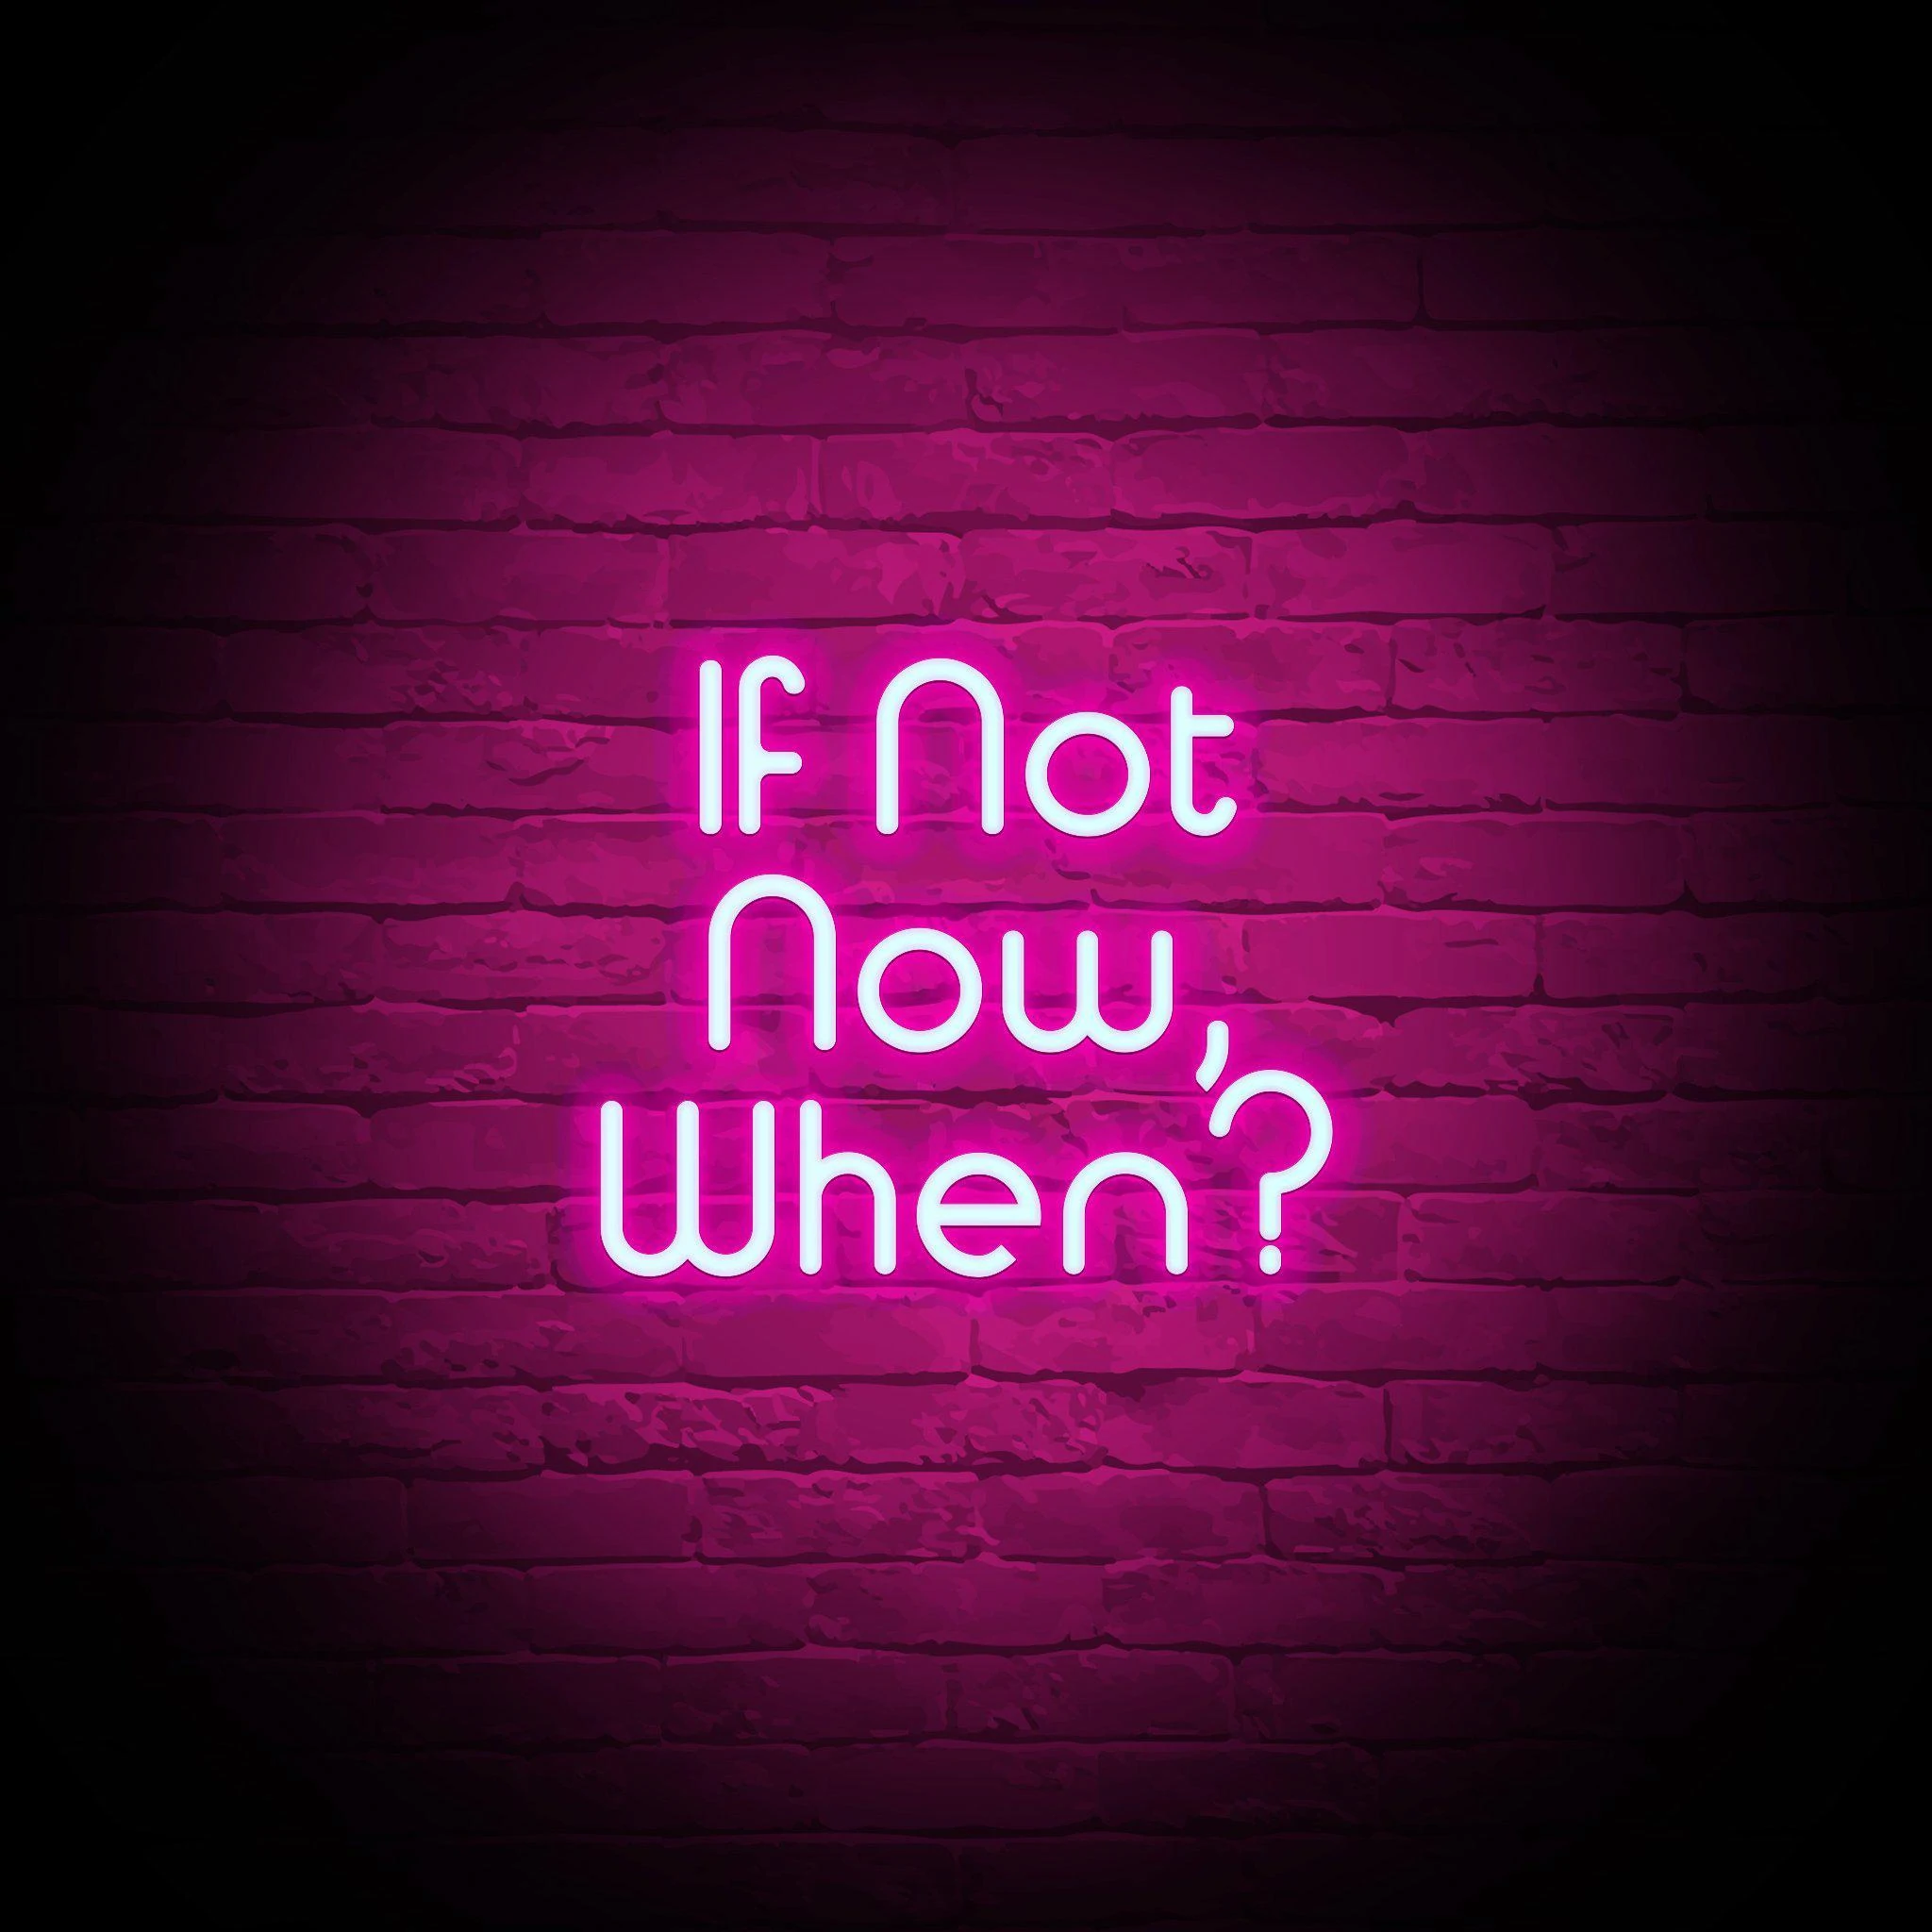 'IF NOT NOW, WHEN?' NEON SIGN